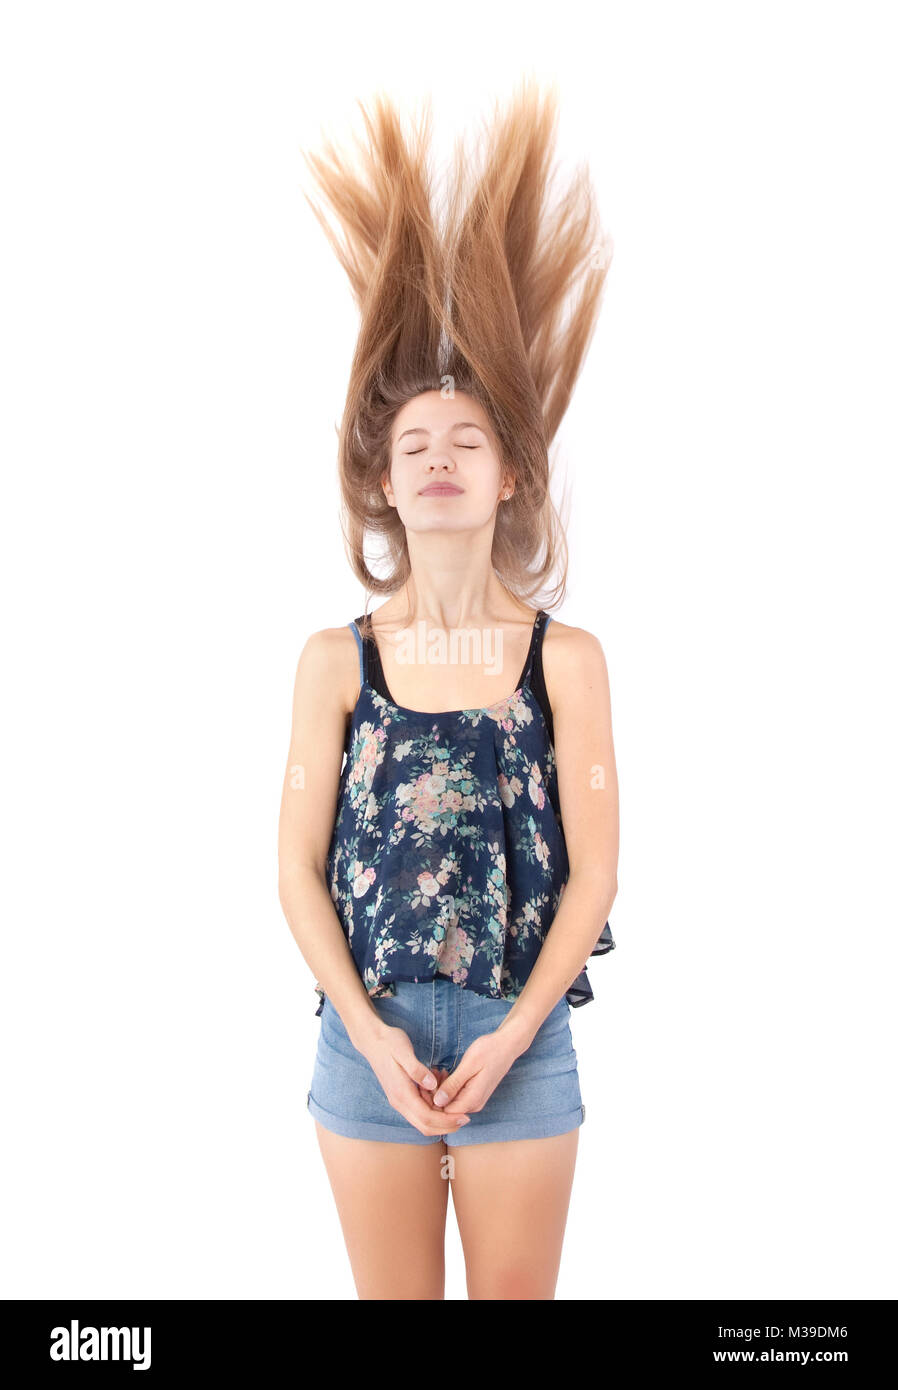 young girl with long blowing hair Stock Photo